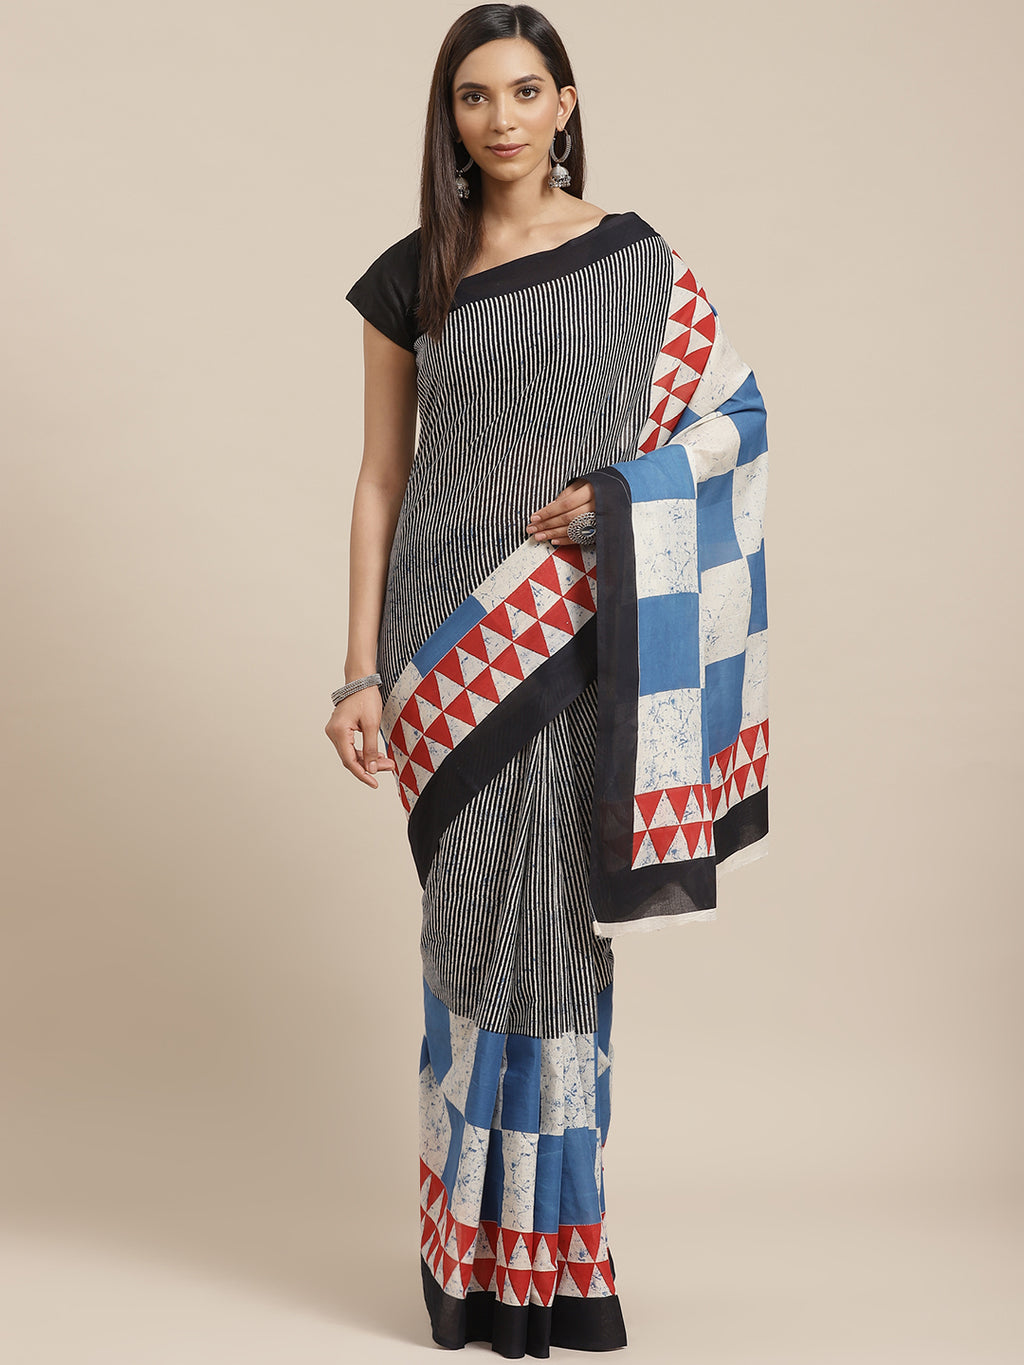 Blue and Red, Kalakari India Pure Cotton Handblock Printed Saree and Blouse RCBGSA0025-Saree-Kalakari India-RCBGSA0025-Cotton, Geographical Indication, Hand Block, Hand Crafted, Heritage Prints, Natural Dyes, Red, Sarees, Sustainable Fabrics, Woven, Yellow-[Linen,Ethnic,wear,Fashionista,Handloom,Handicraft,Indigo,blockprint,block,print,Cotton,Chanderi,Blue, latest,classy,party,bollywood,trendy,summer,style,traditional,formal,elegant,unique,style,hand,block,print, dabu,booti,gift,present,glamorou